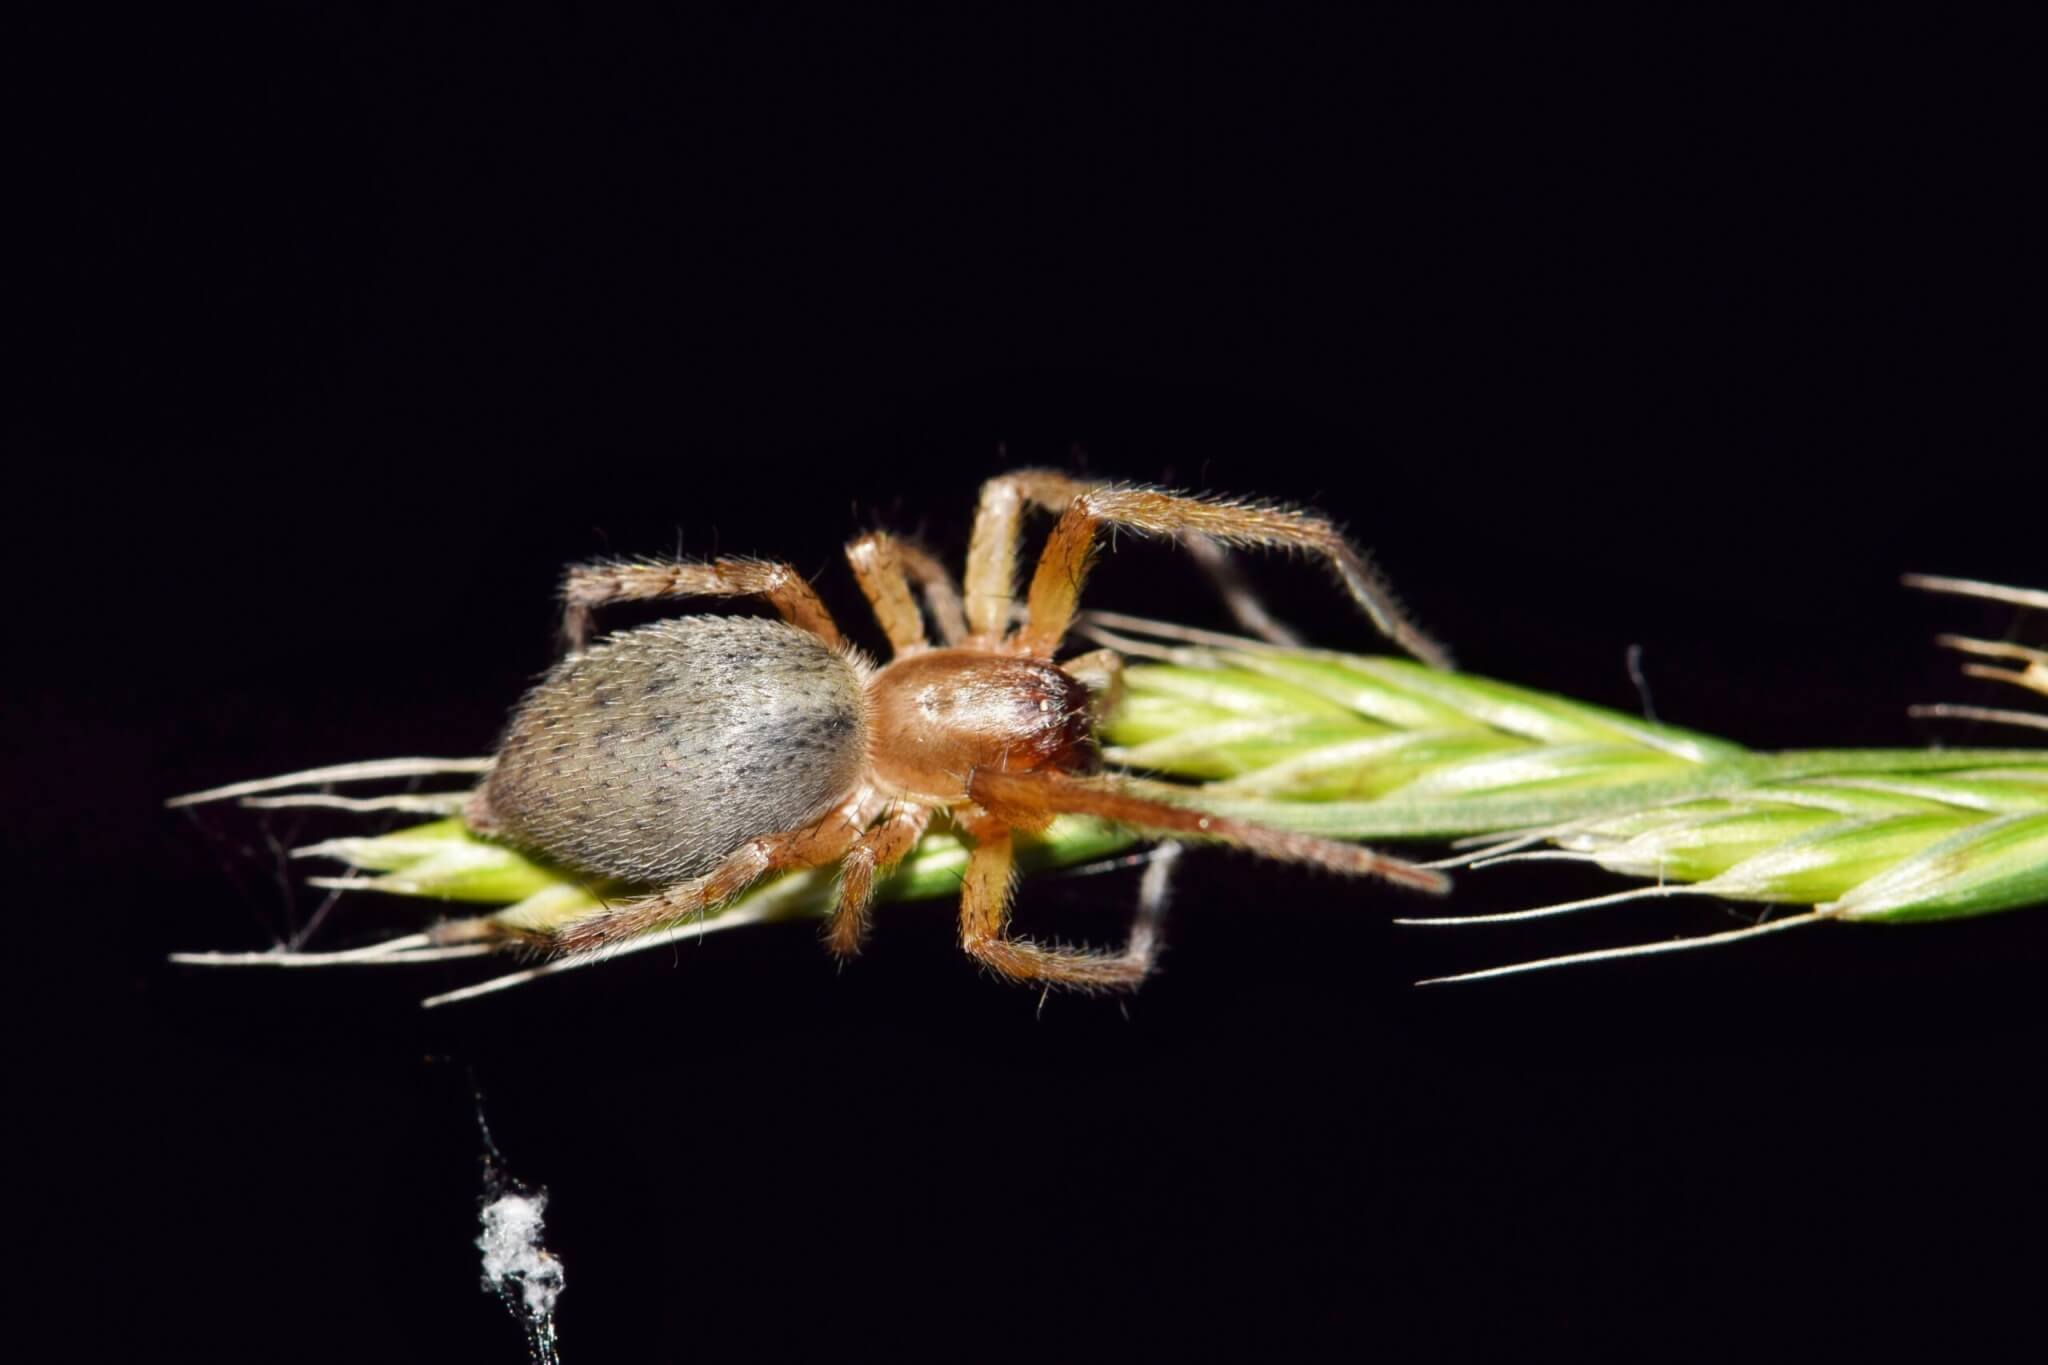 This Yellow Sac spider (Cheiracanthium) is out hunting at night on a grass seed stalk.